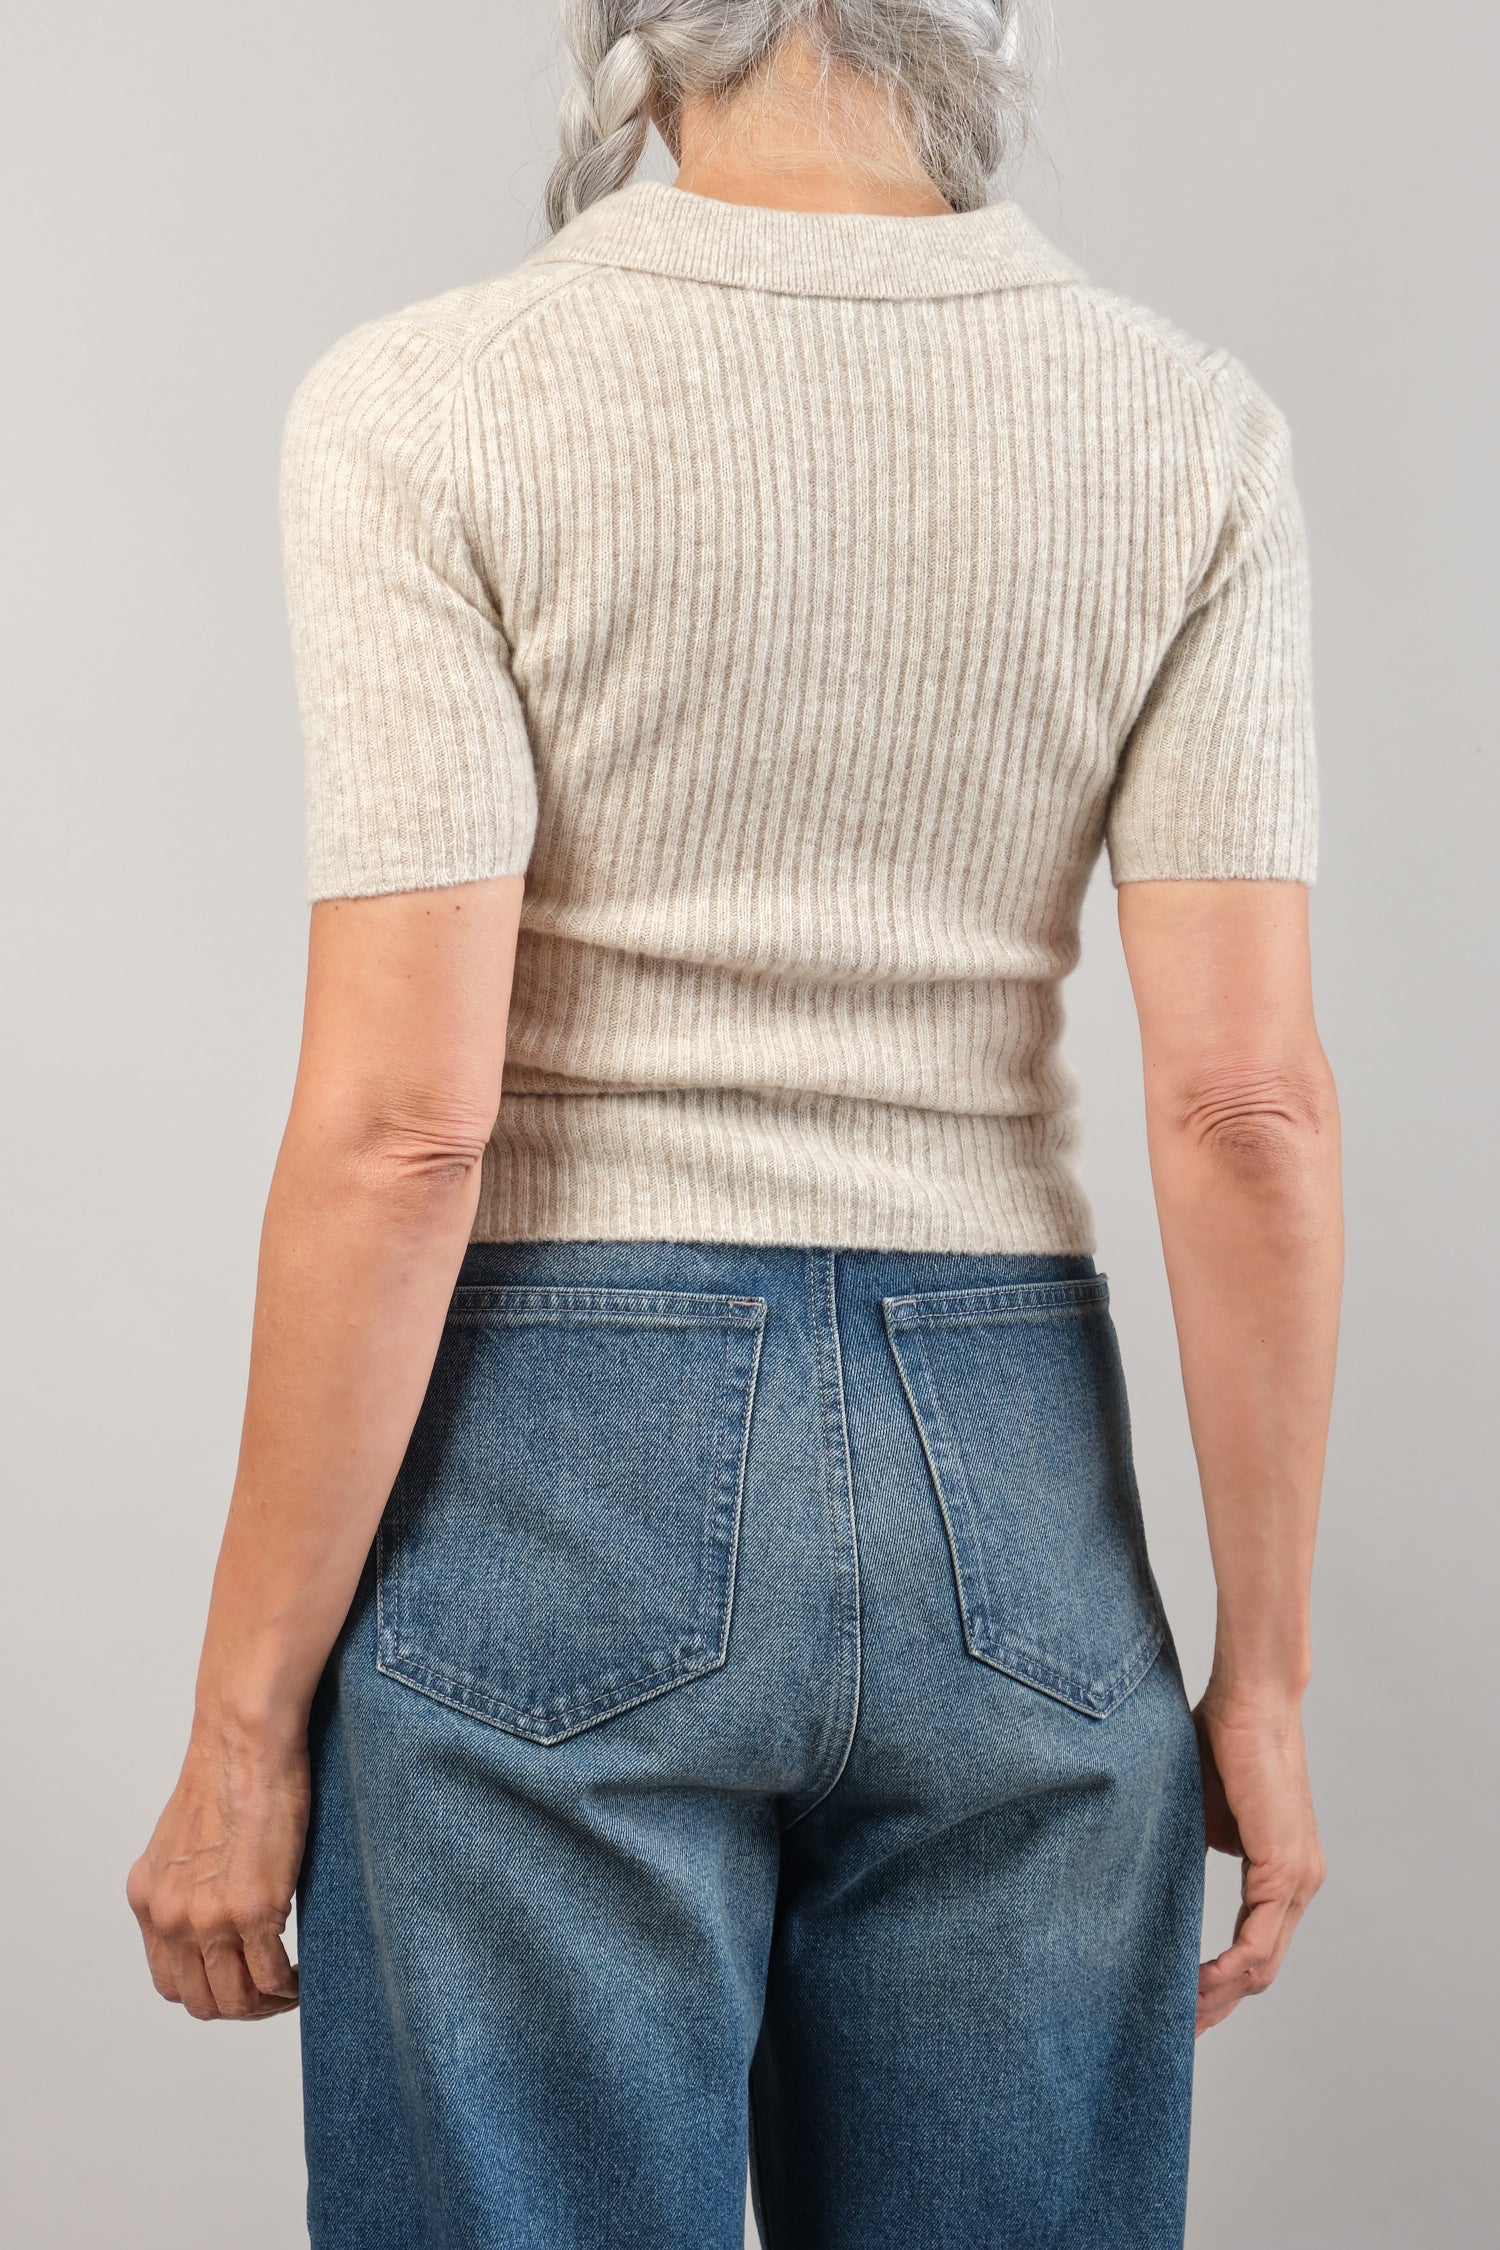 Back of Molly Collared Short Sleeve in Heather Dove